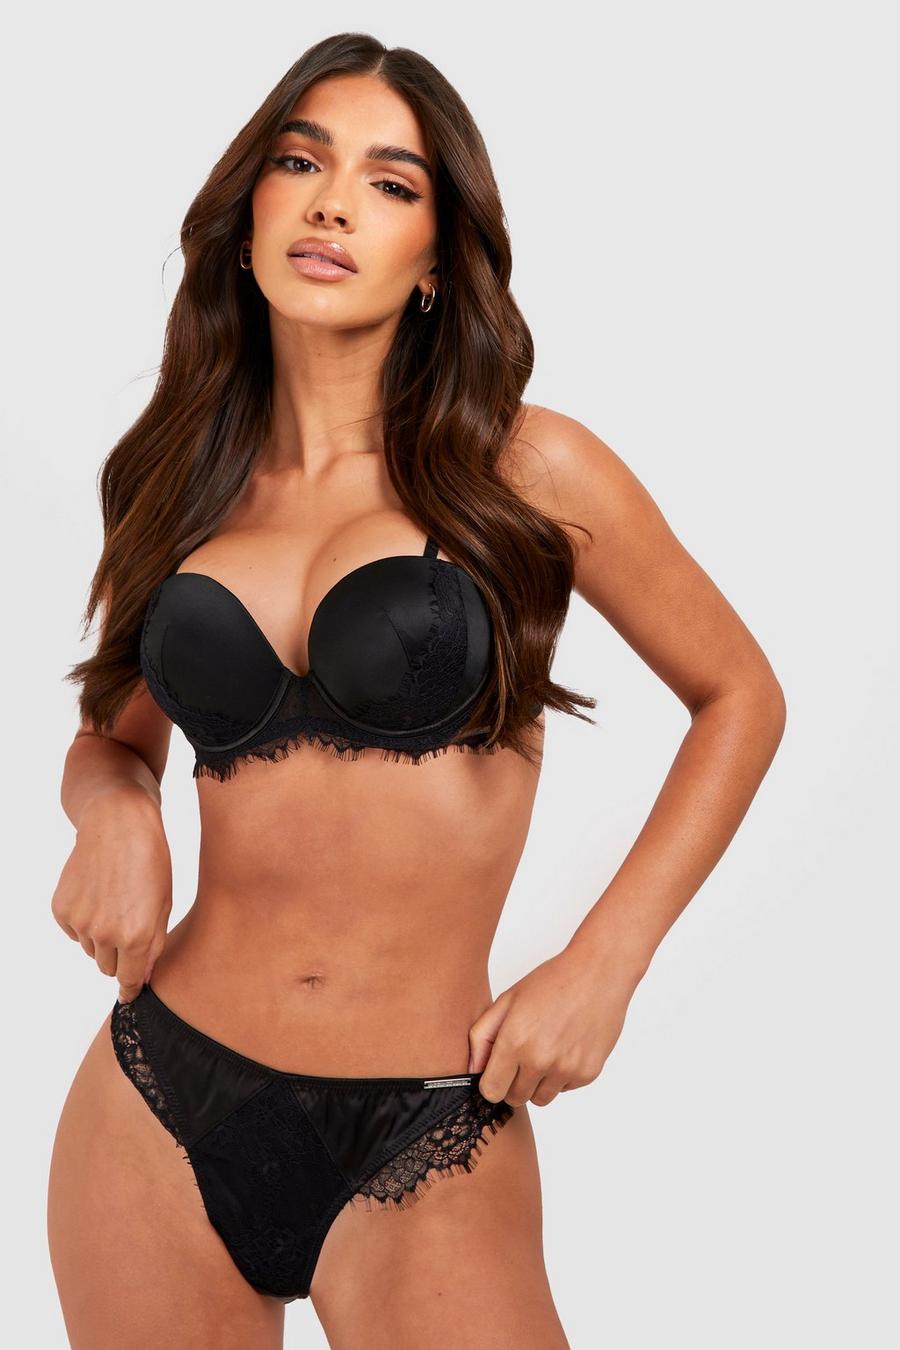 Boohoo have released a sexy Valentine's lingerie collection and we